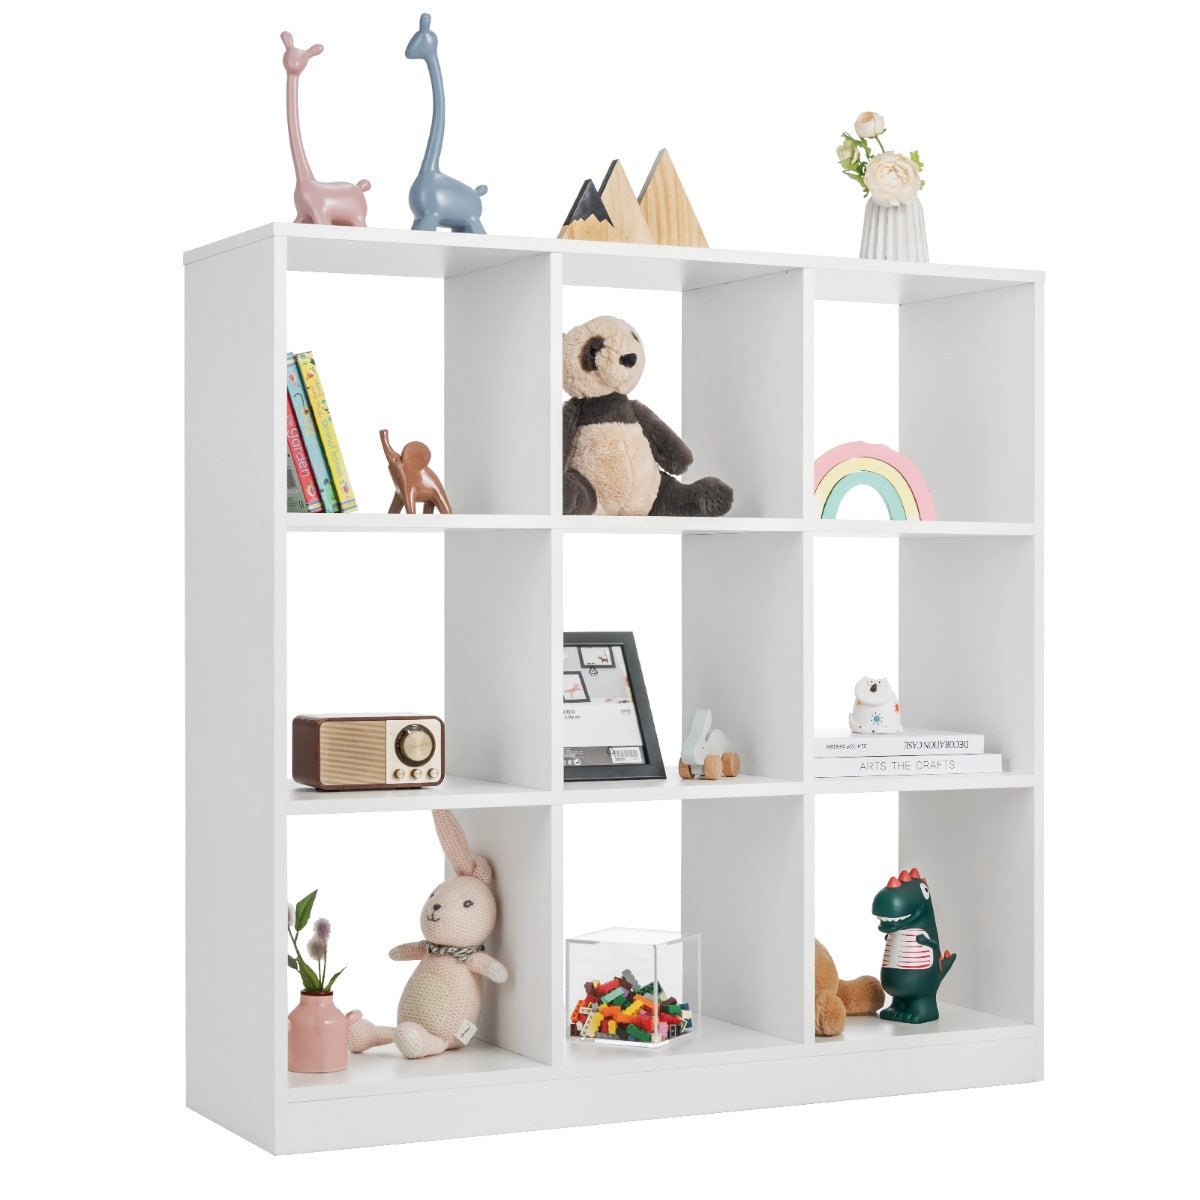 Secure Kids Toy Storage - Organizer with Anti-toppling Device